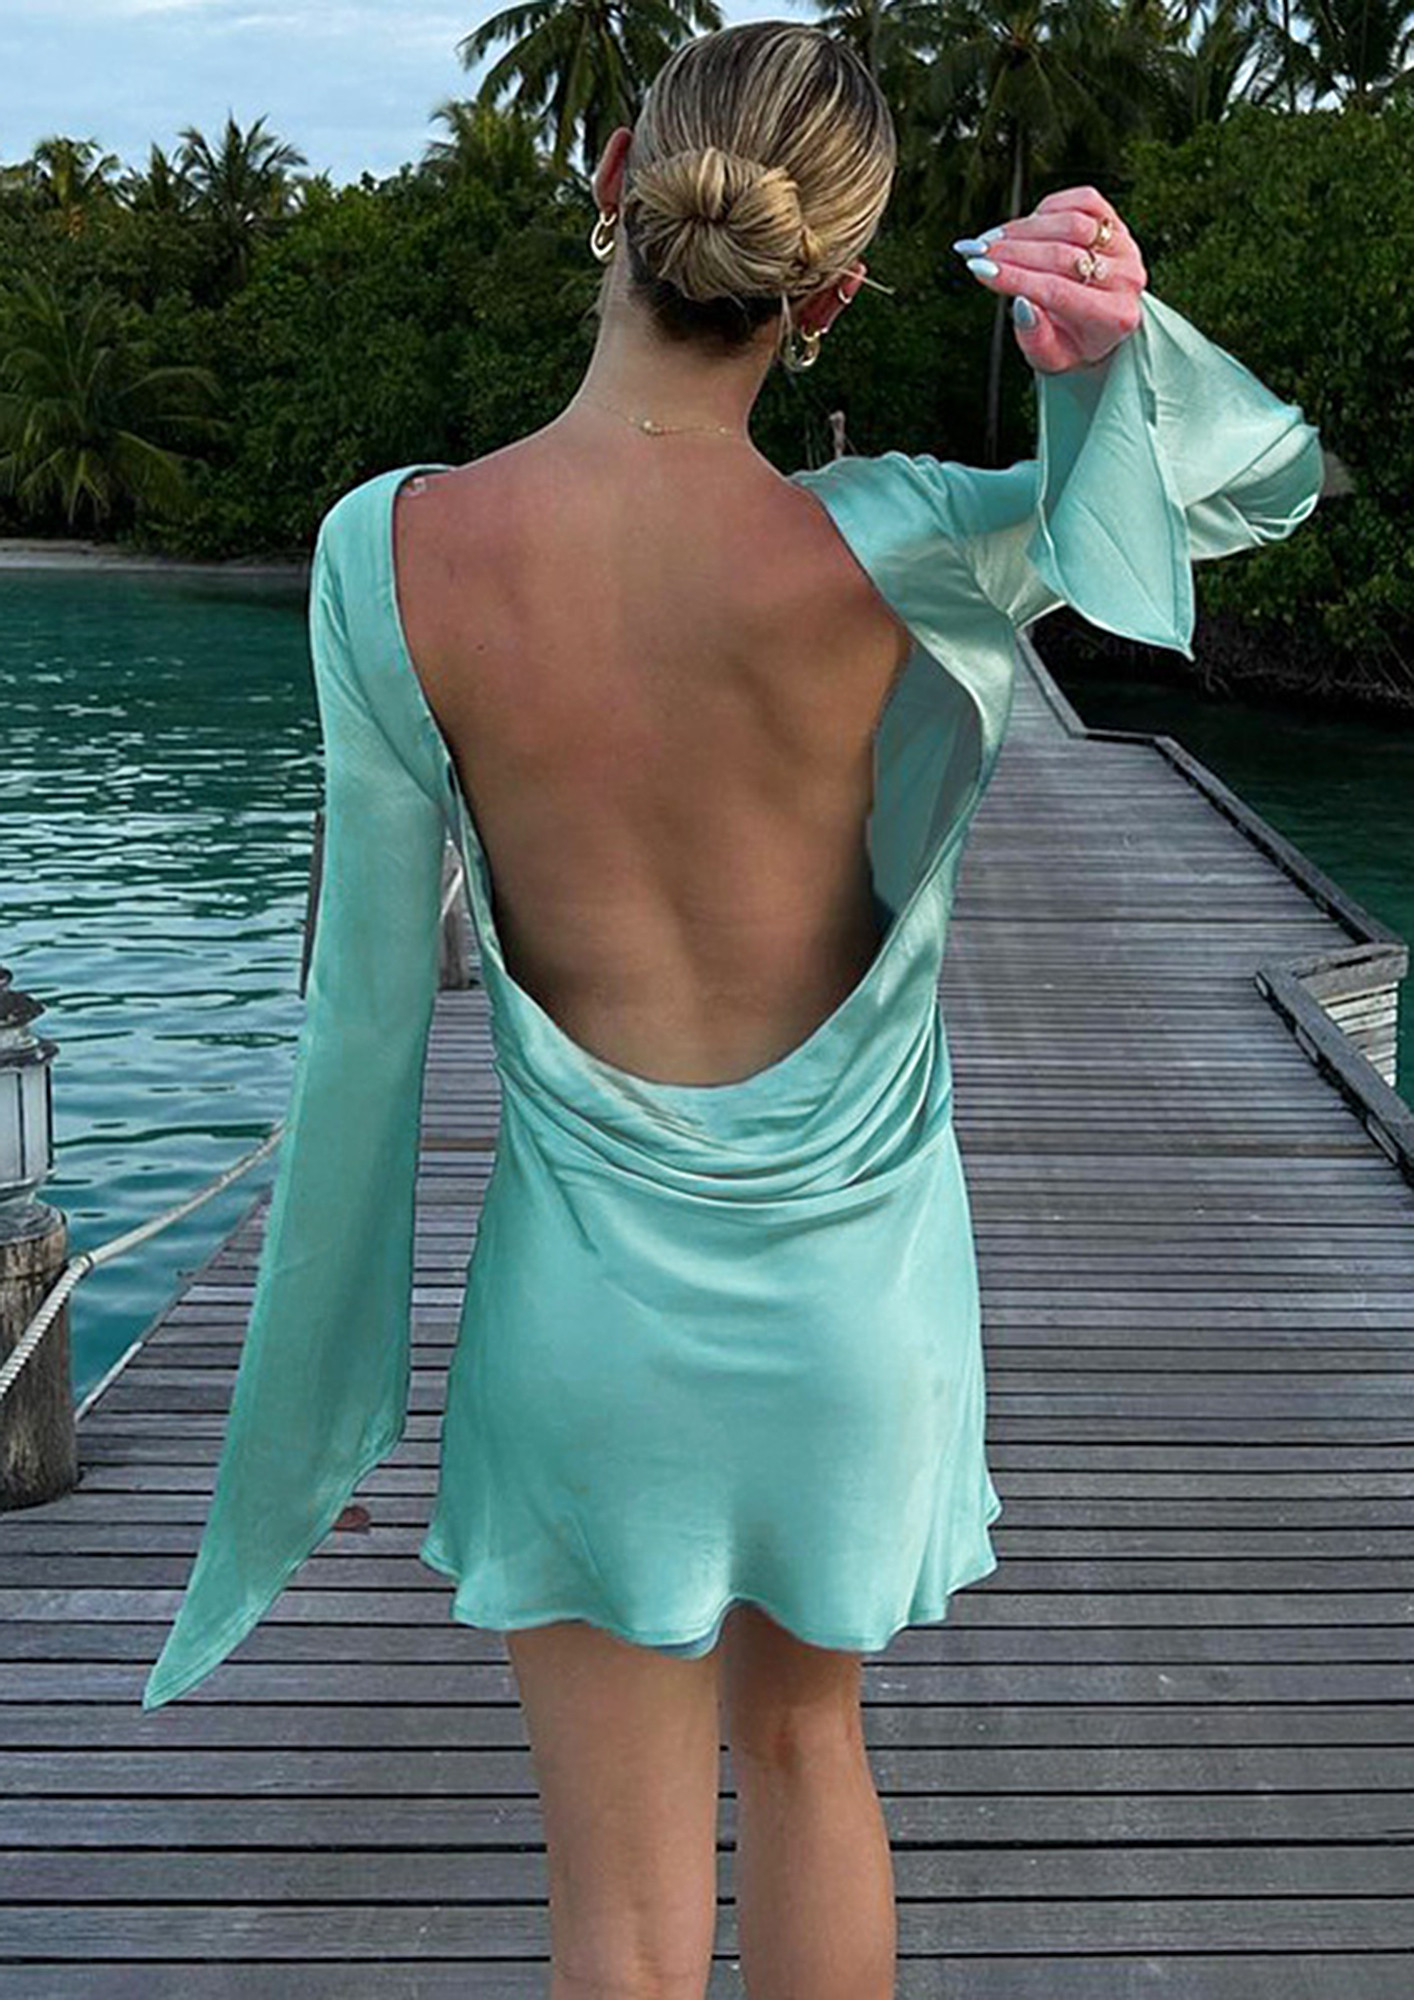 Tips and tricks to nail a backless dress look